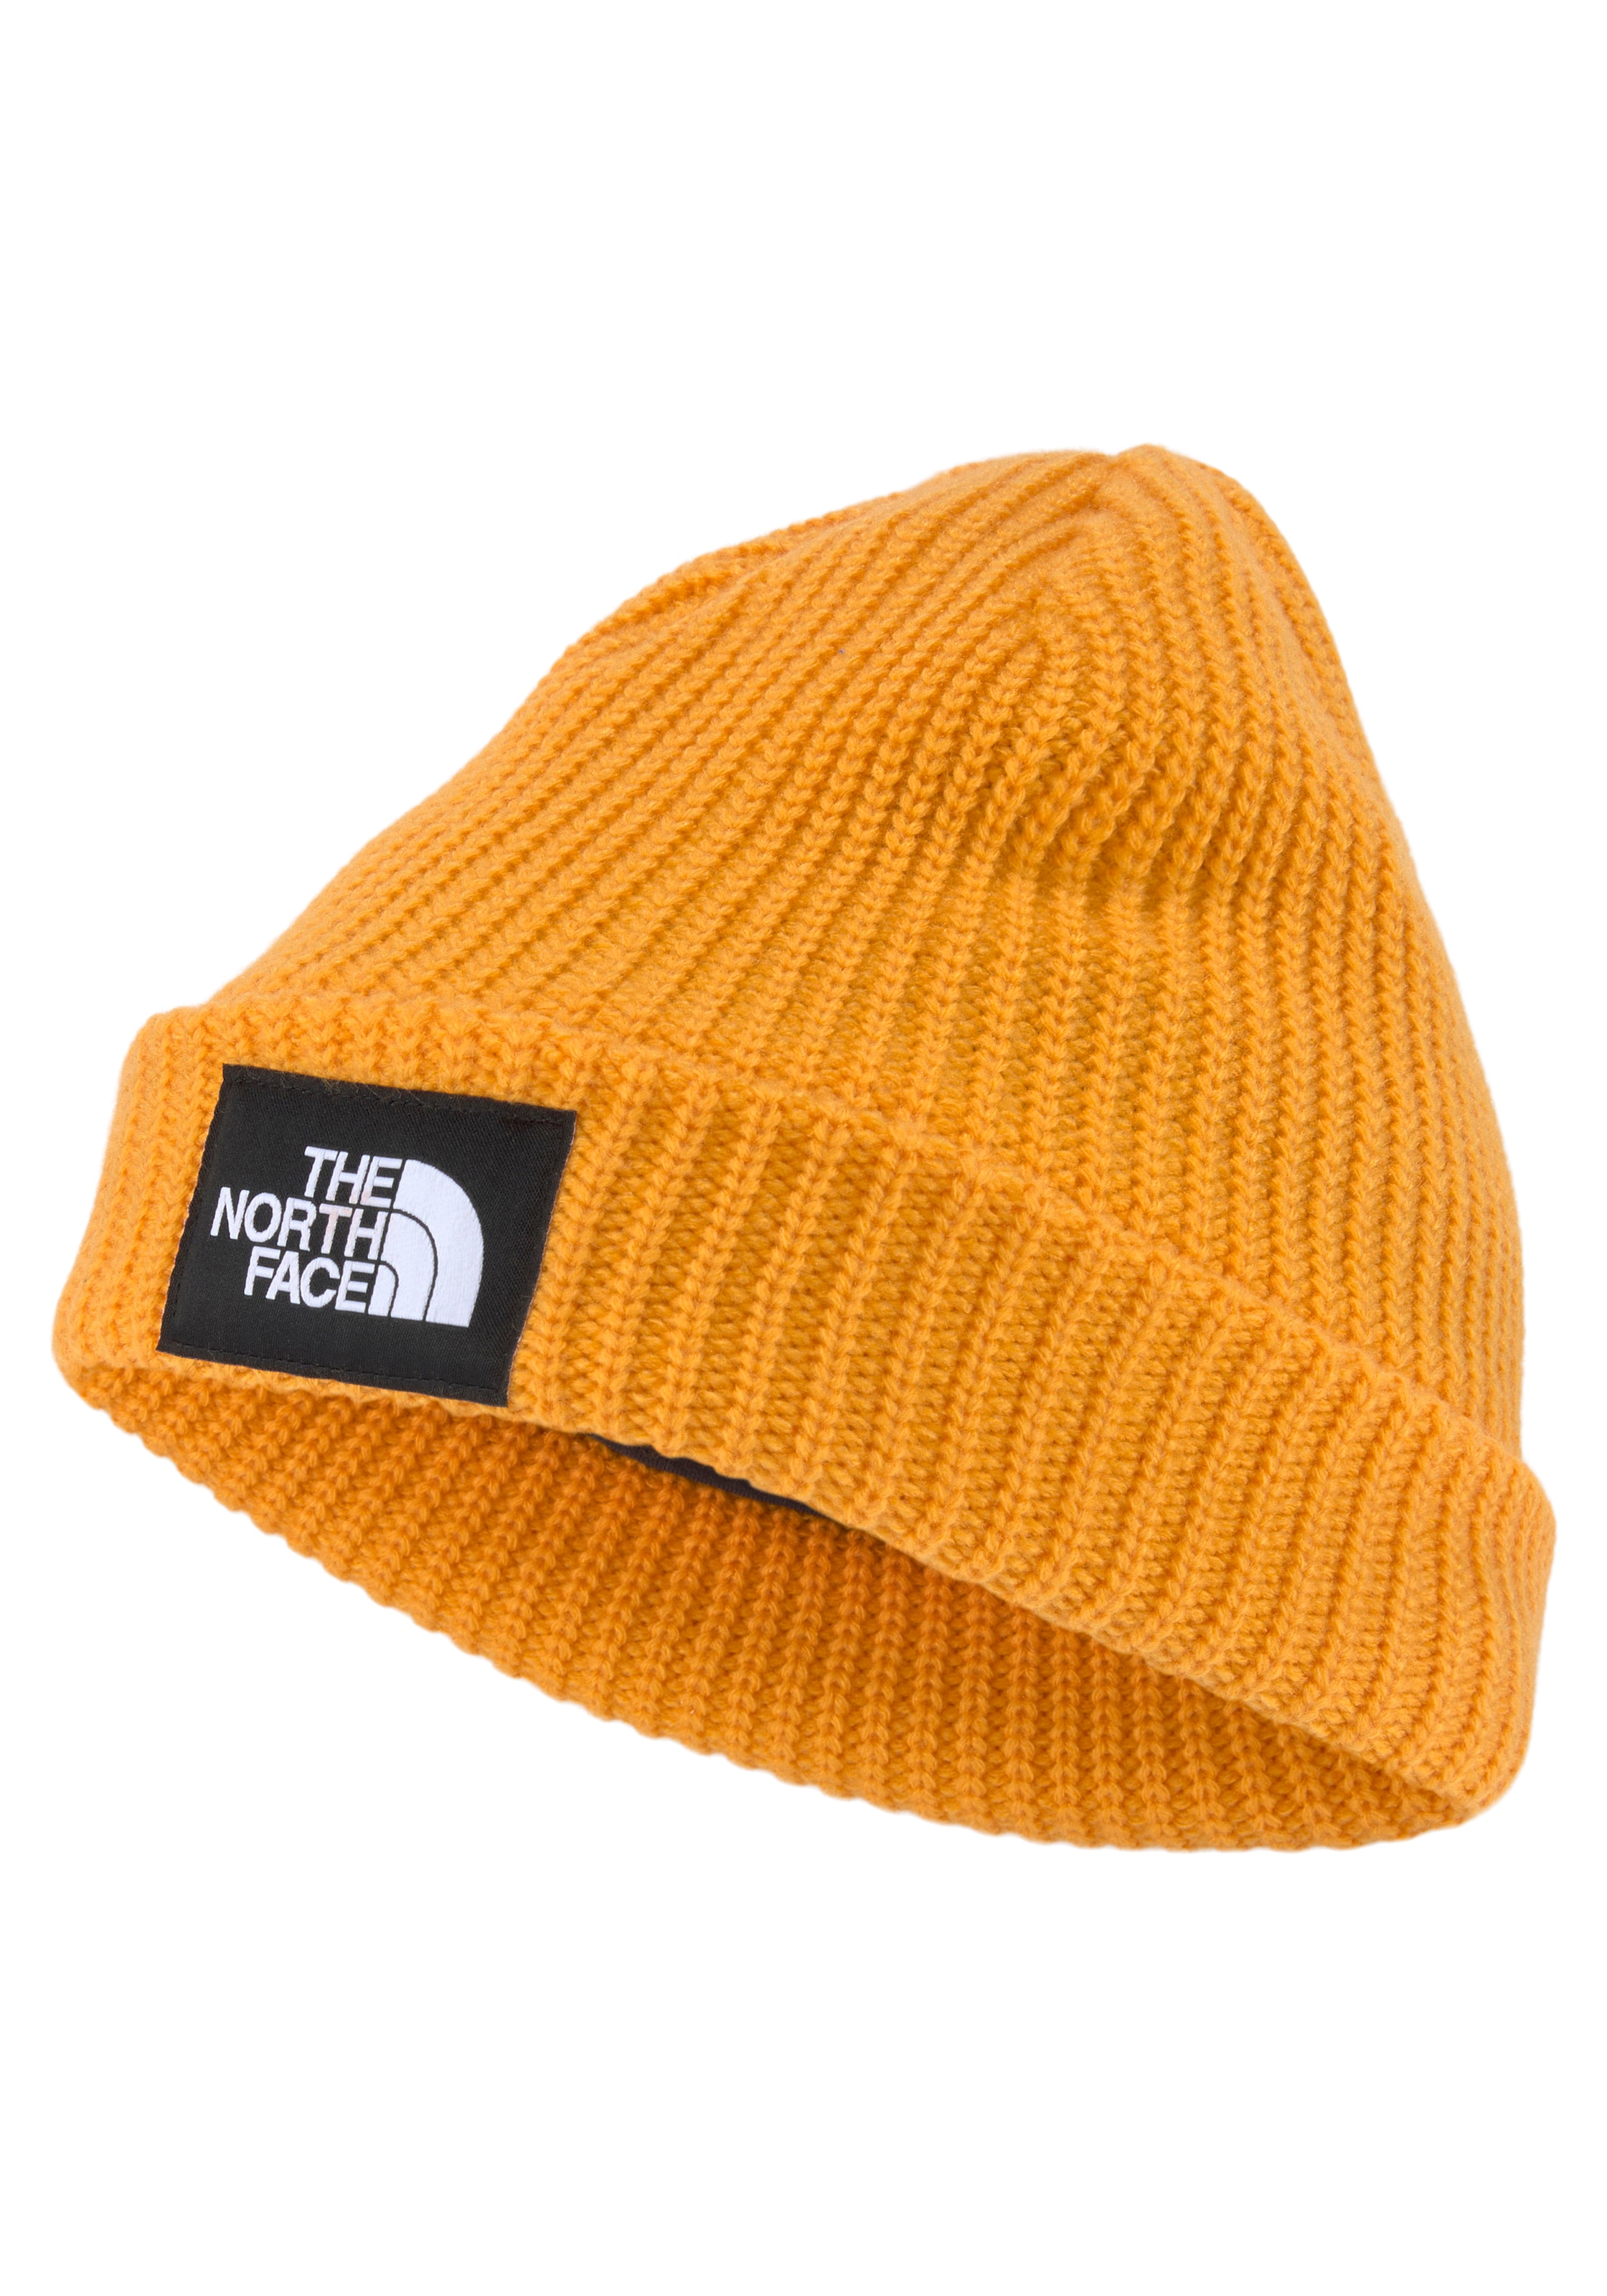 The North Face Beanie DOG »SALTY kaufen mit | Logolabel BEANIE«, LINED UNIVERSAL